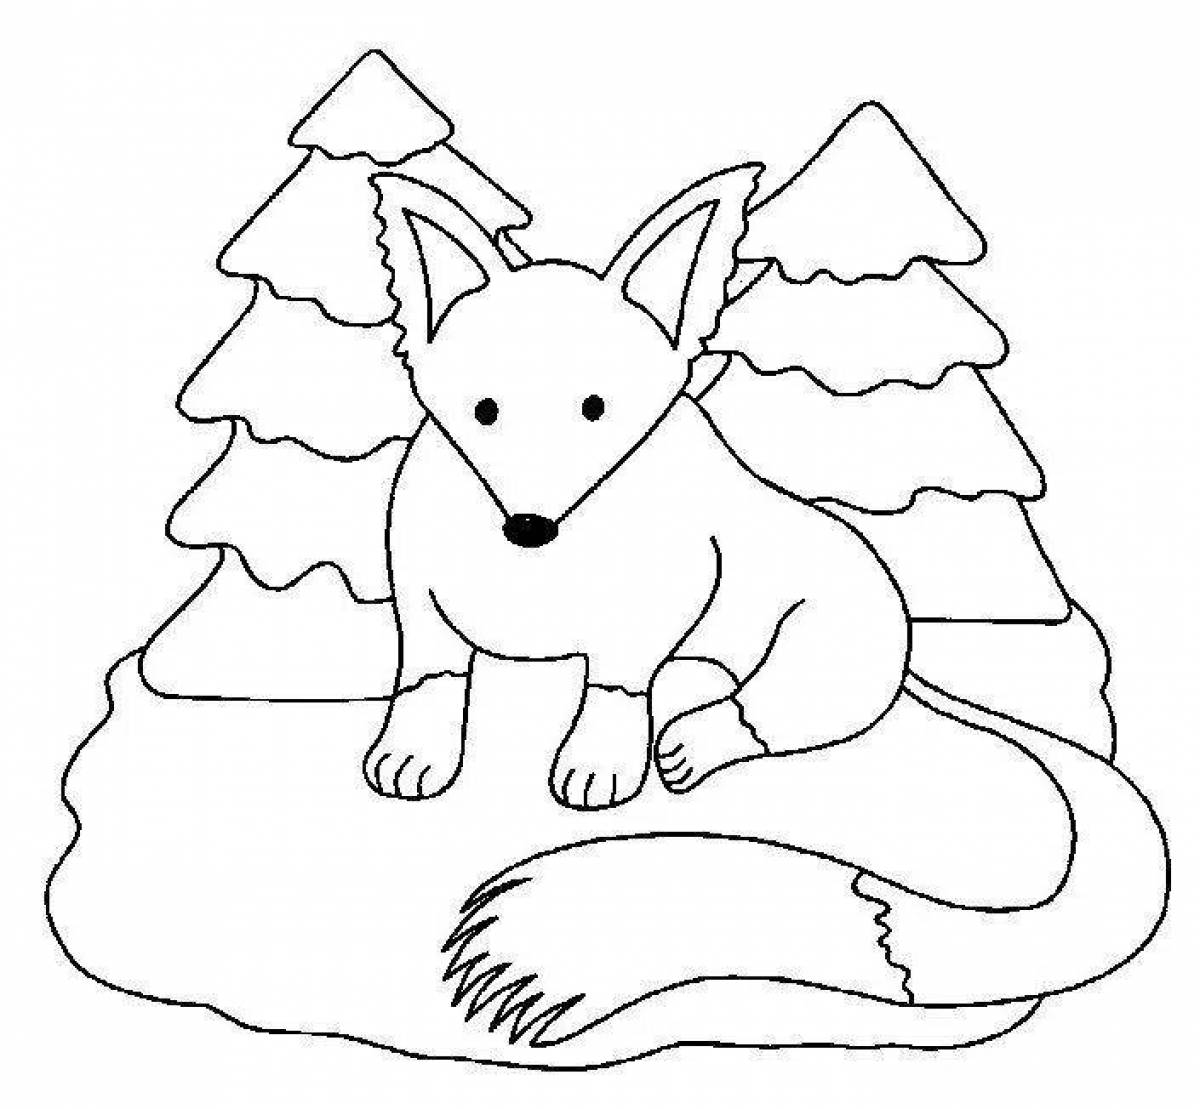 Shiny animal coloring pages for kids in winter